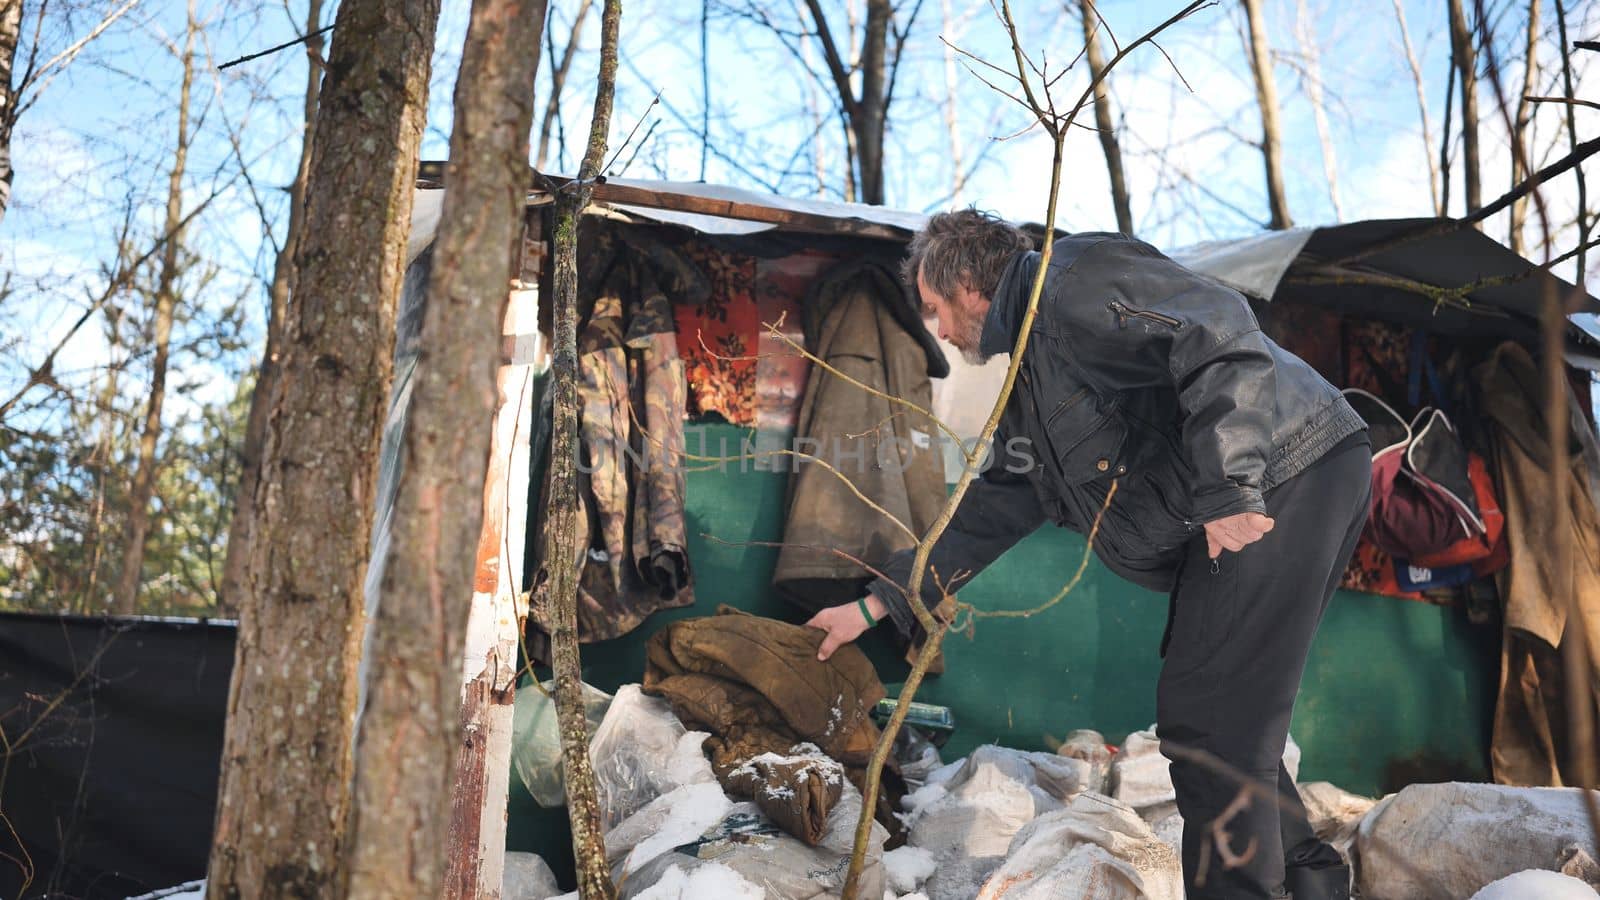 A homeless man goes through things at his cabin in the woods in winter